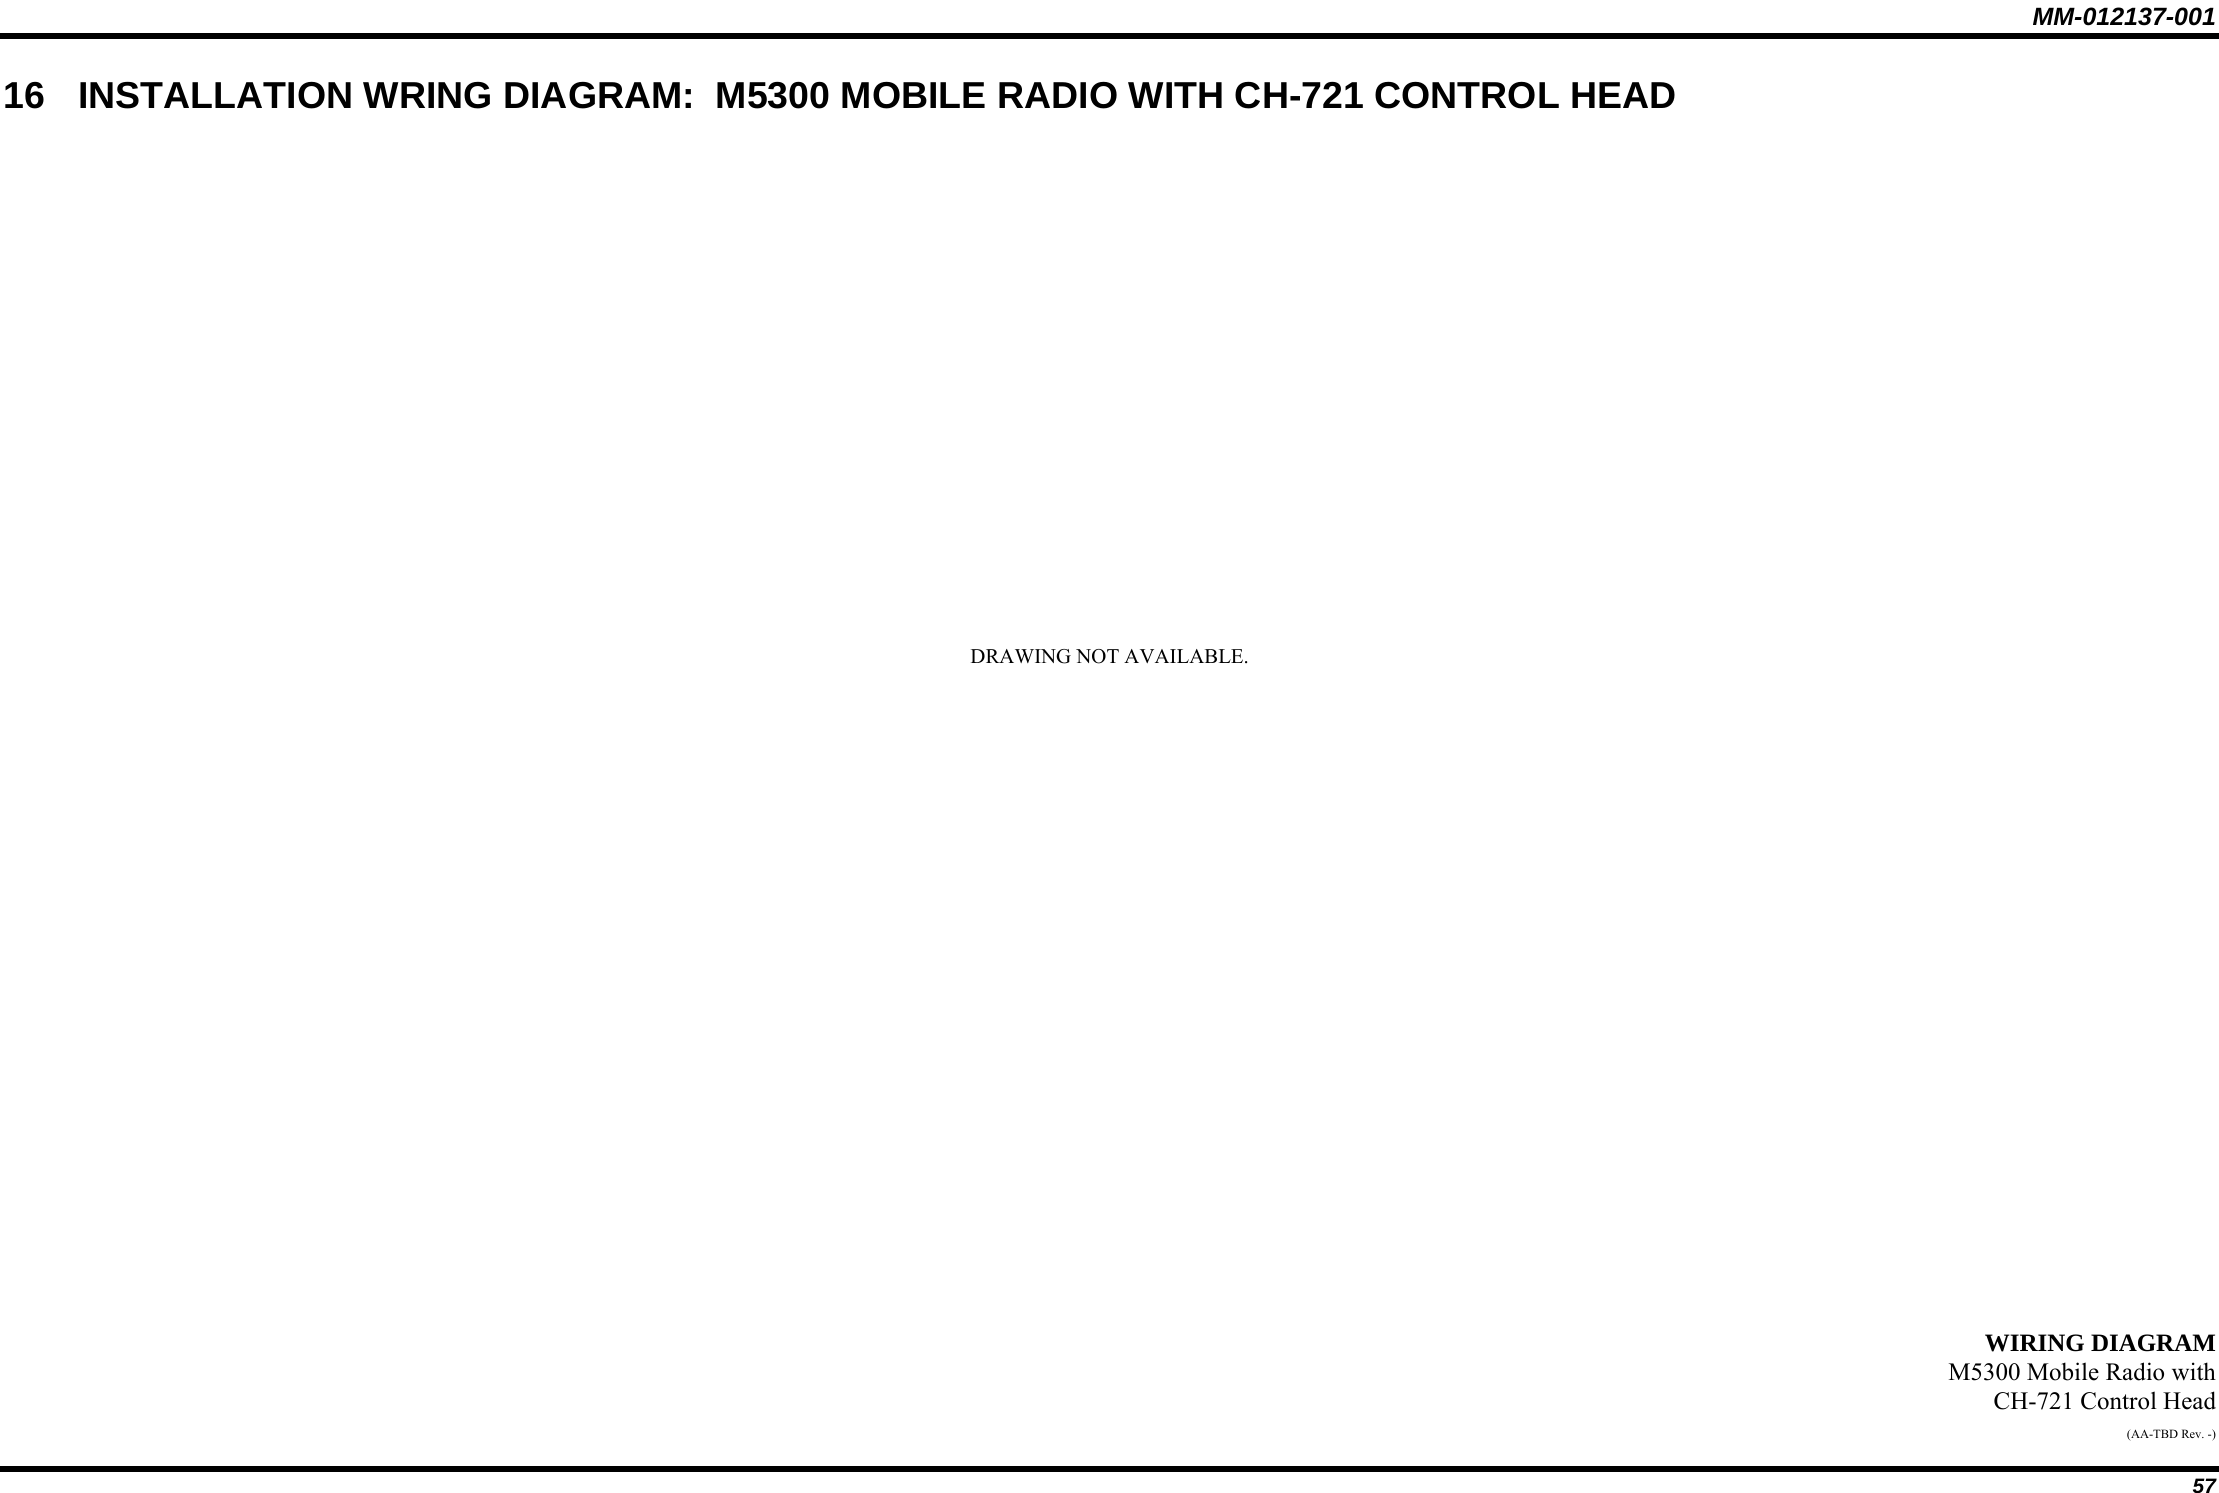 MM-012137-001 57 16  INSTALLATION WRING DIAGRAM:  M5300 MOBILE RADIO WITH CH-721 CONTROL HEAD                      DRAWING NOT AVAILABLE.                           WIRING DIAGRAM M5300 Mobile Radio with CH-721 Control Head (AA-TBD Rev. -) 